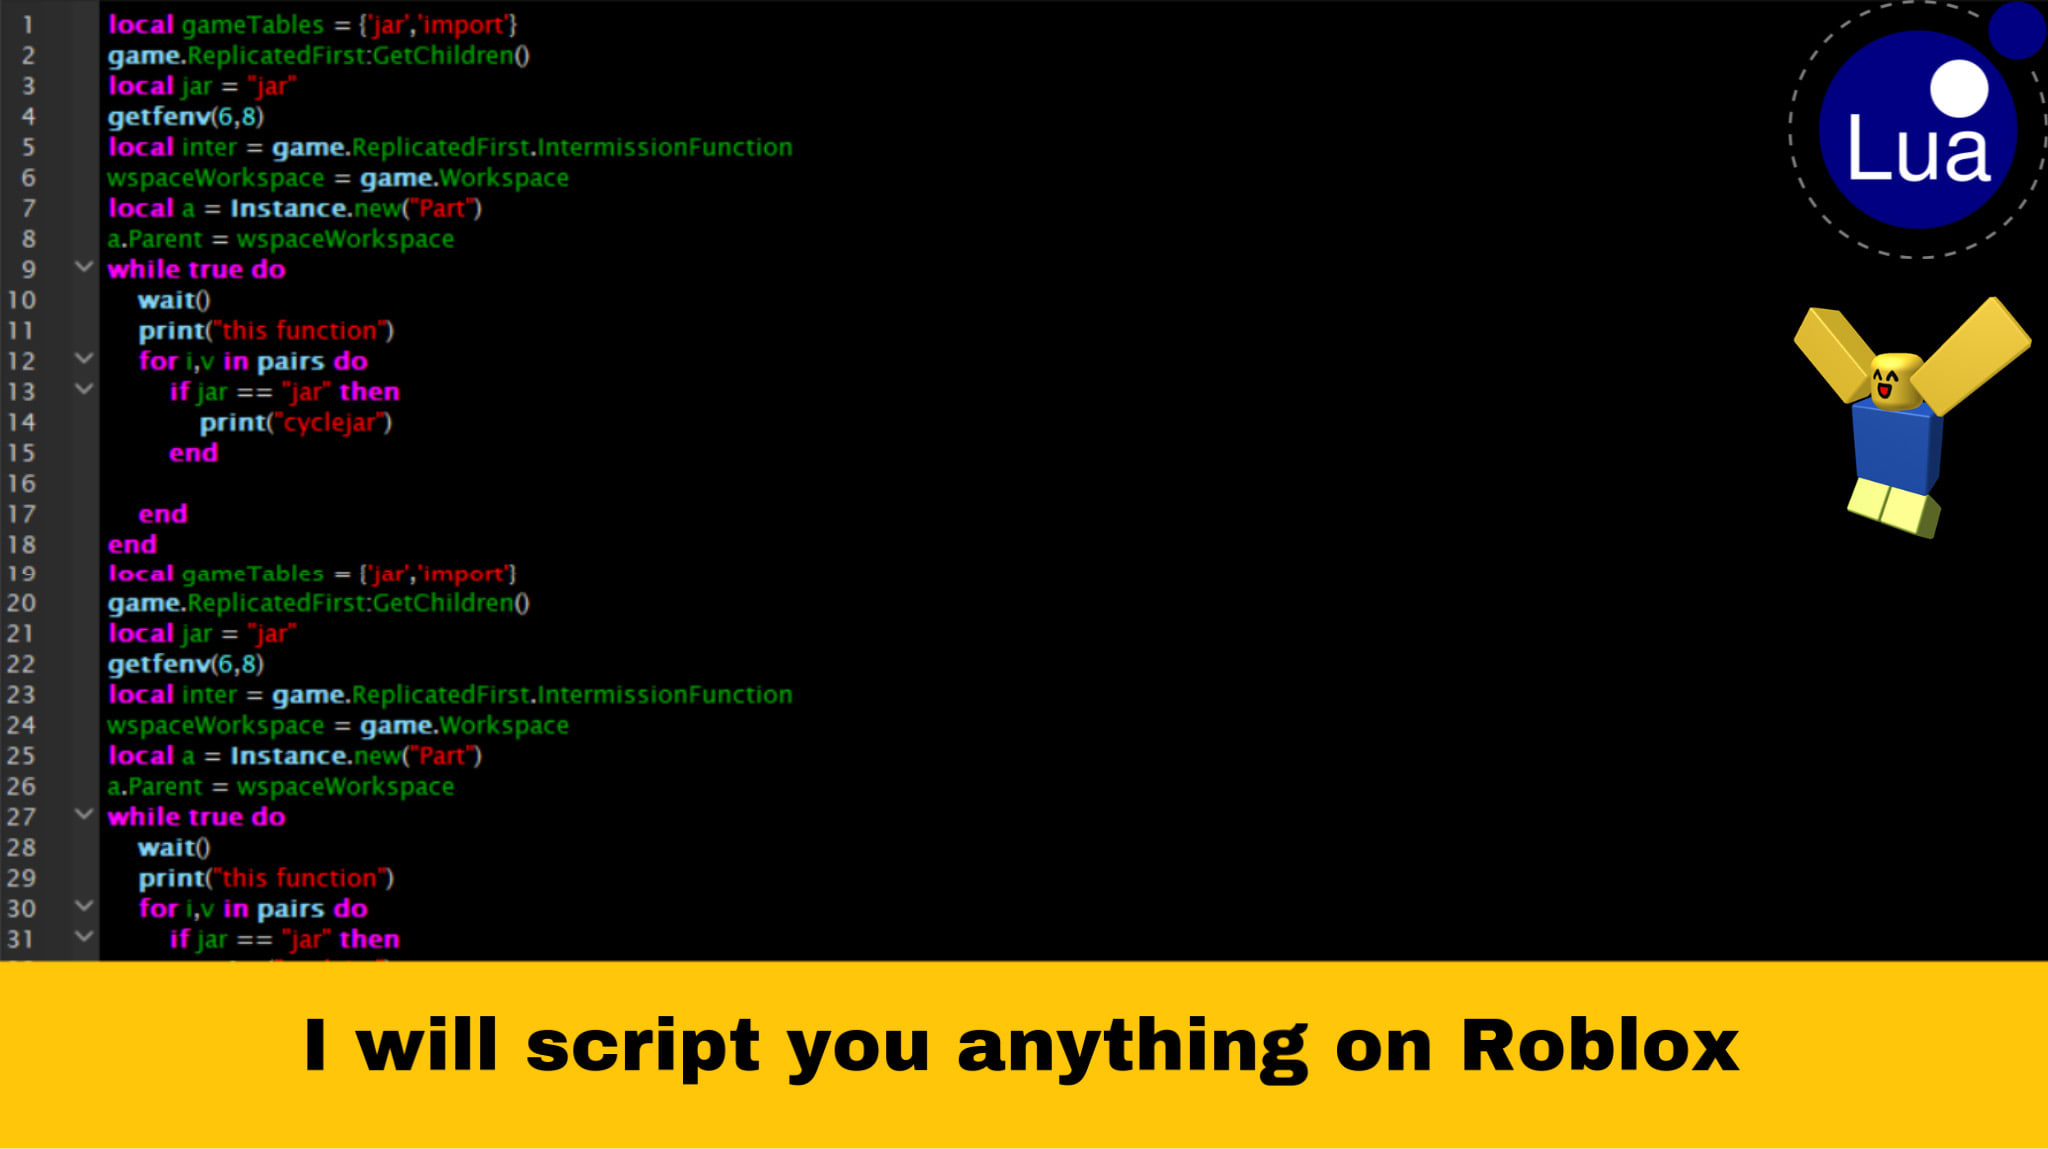 Make A Script Or A System For You On Roblox By Frepzter - roblox lua while true do